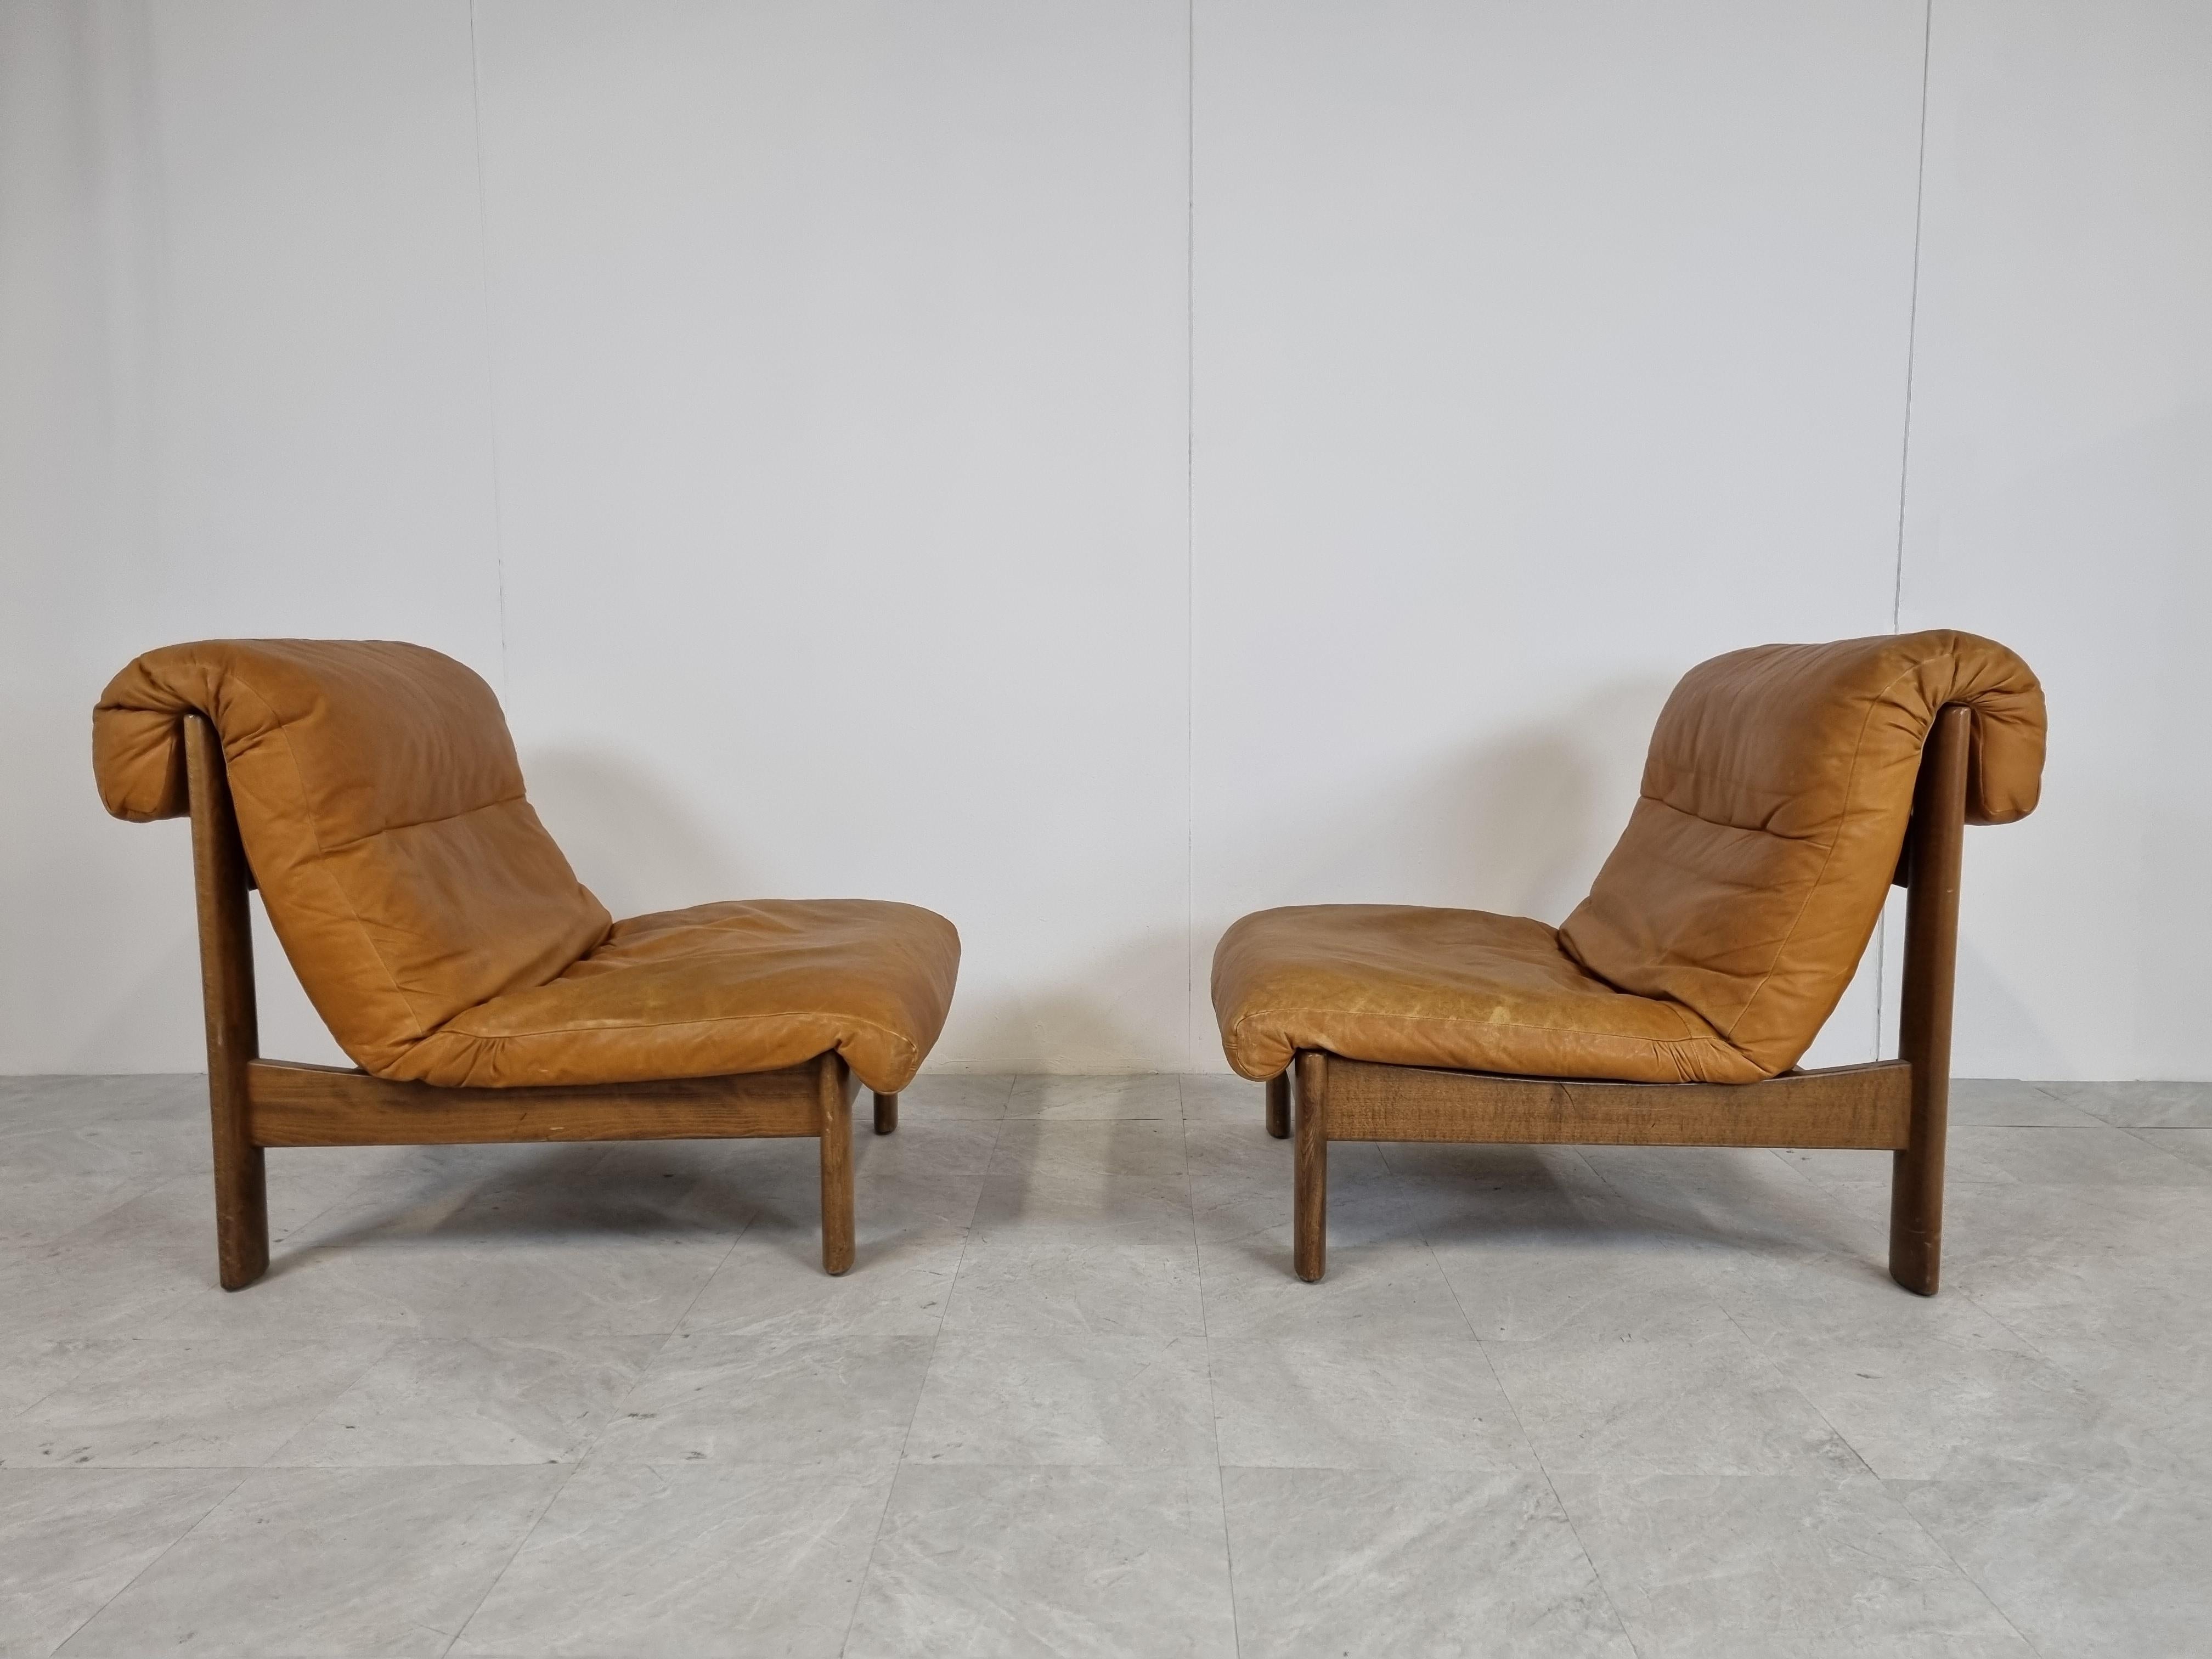 German Vintage Leather Lounge Chairs, 1970s Set of 2